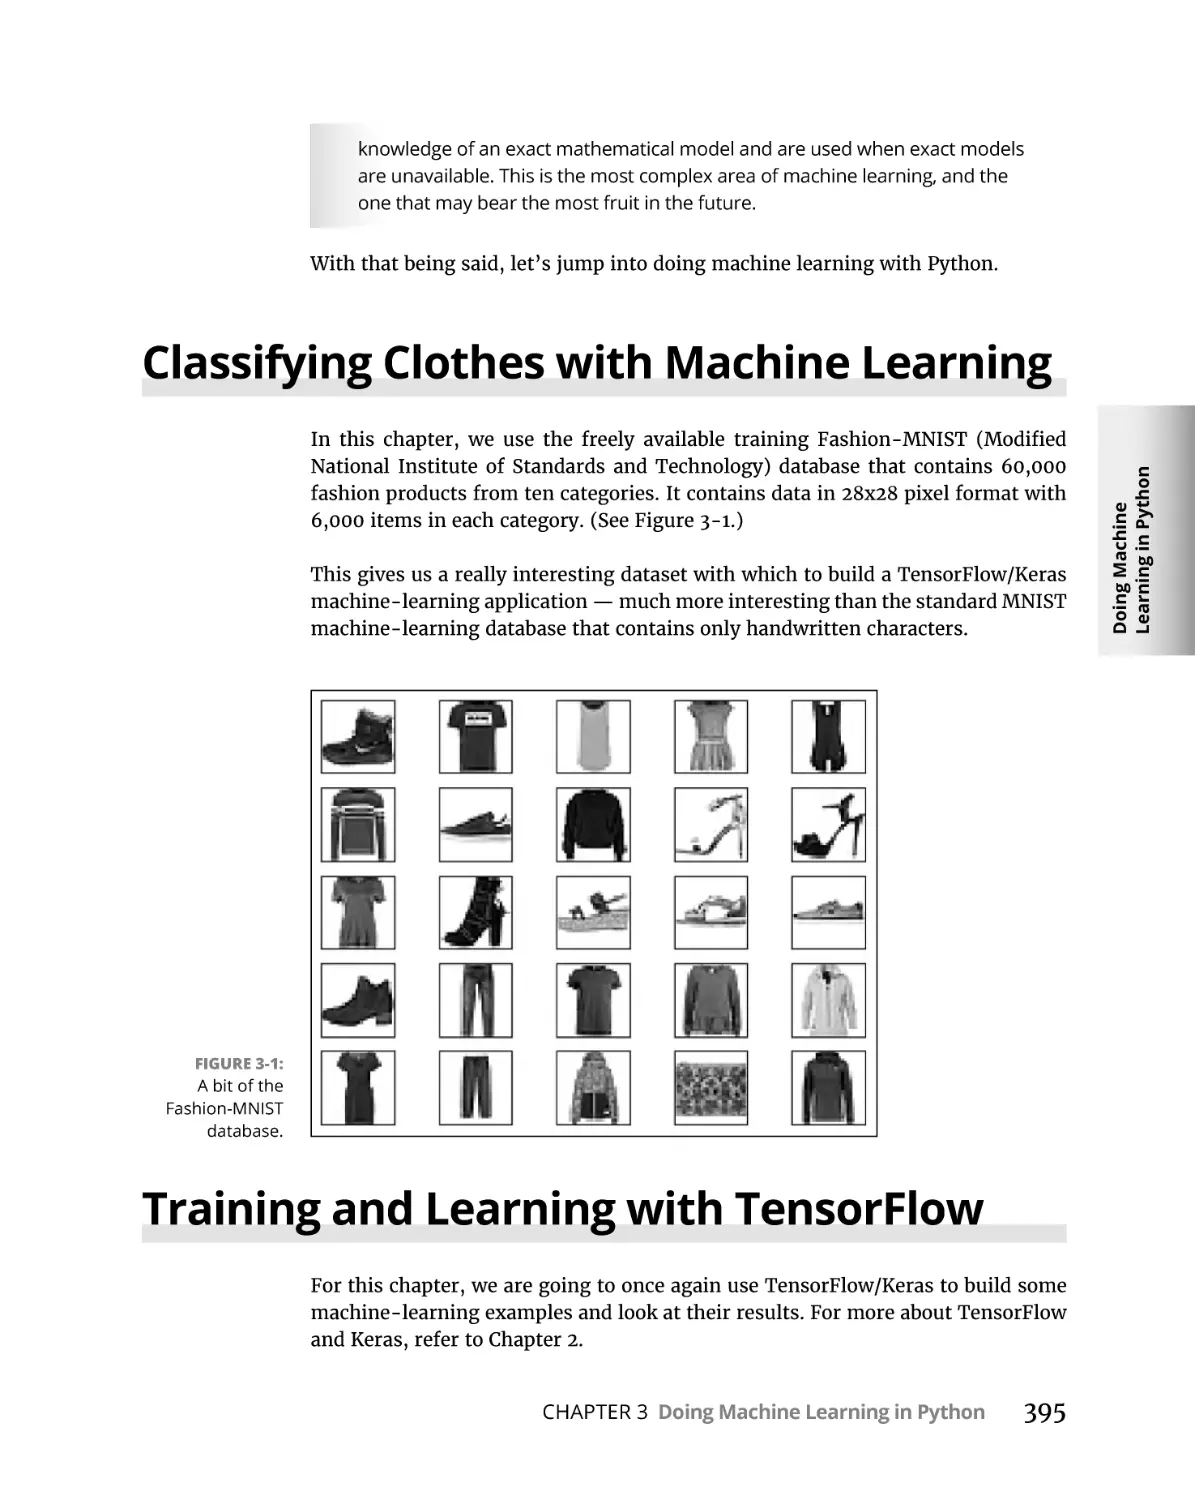 Classifying Clothes with Machine Learning
Training and Learning with TensorFlow